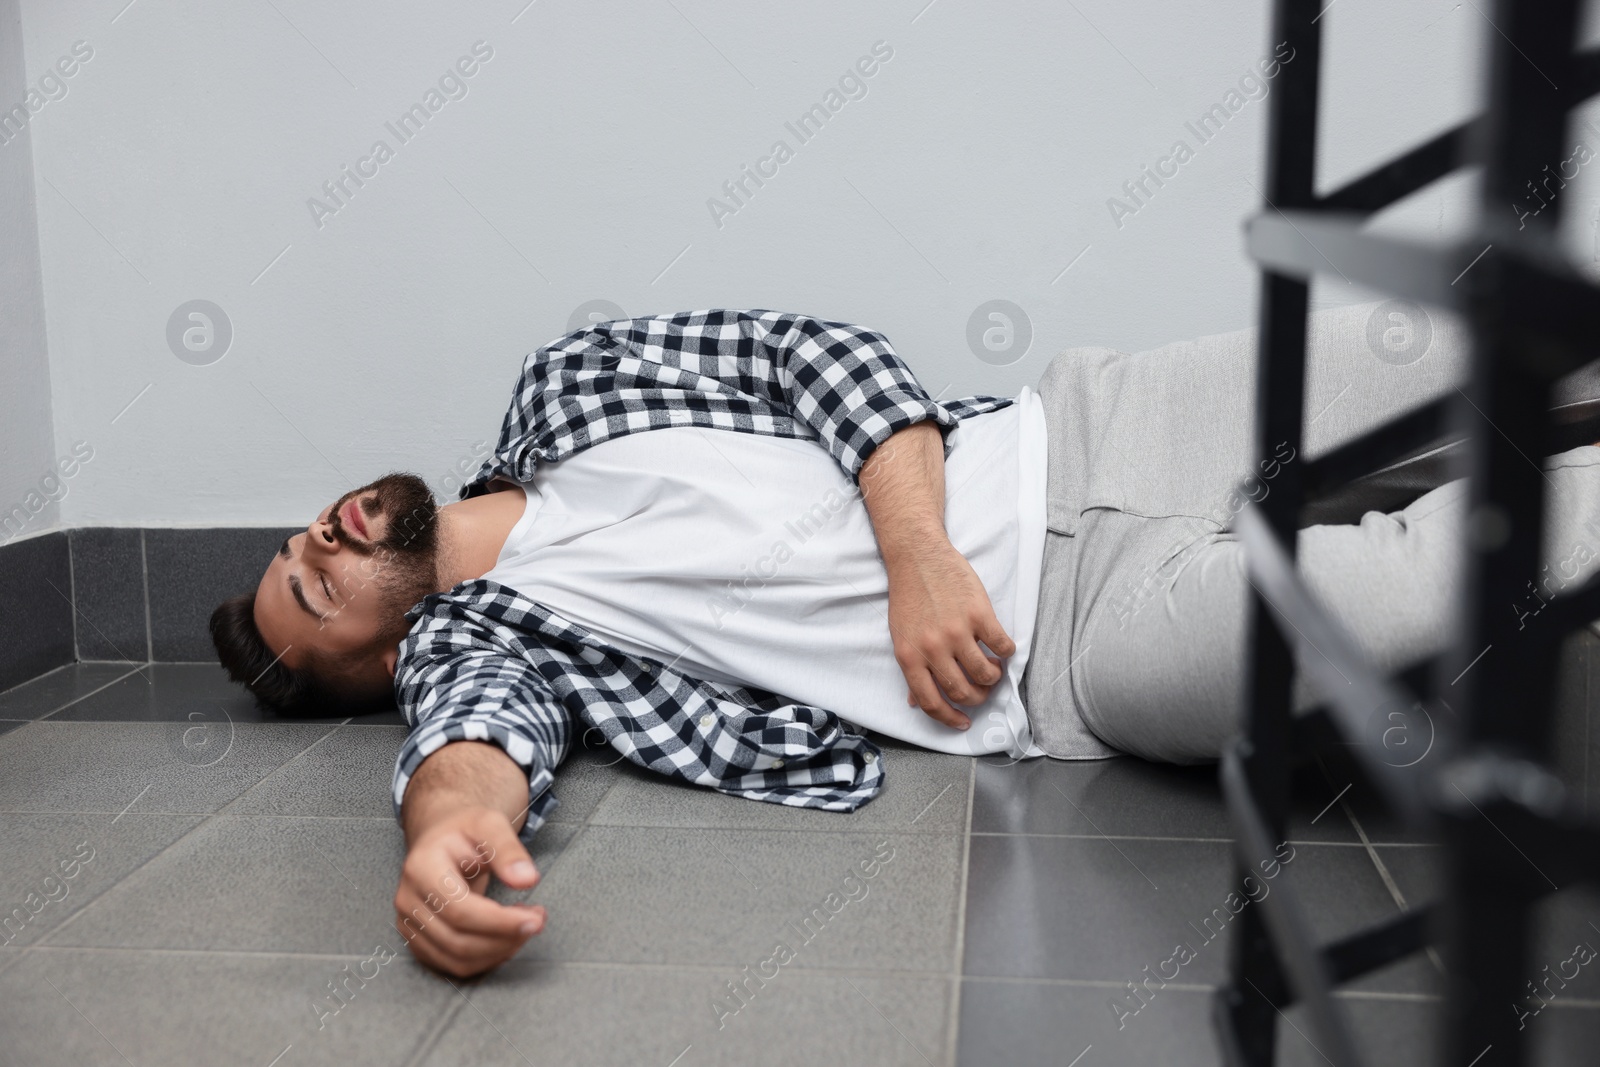 Photo of Unconscious man lying on floor after falling down stairs indoors